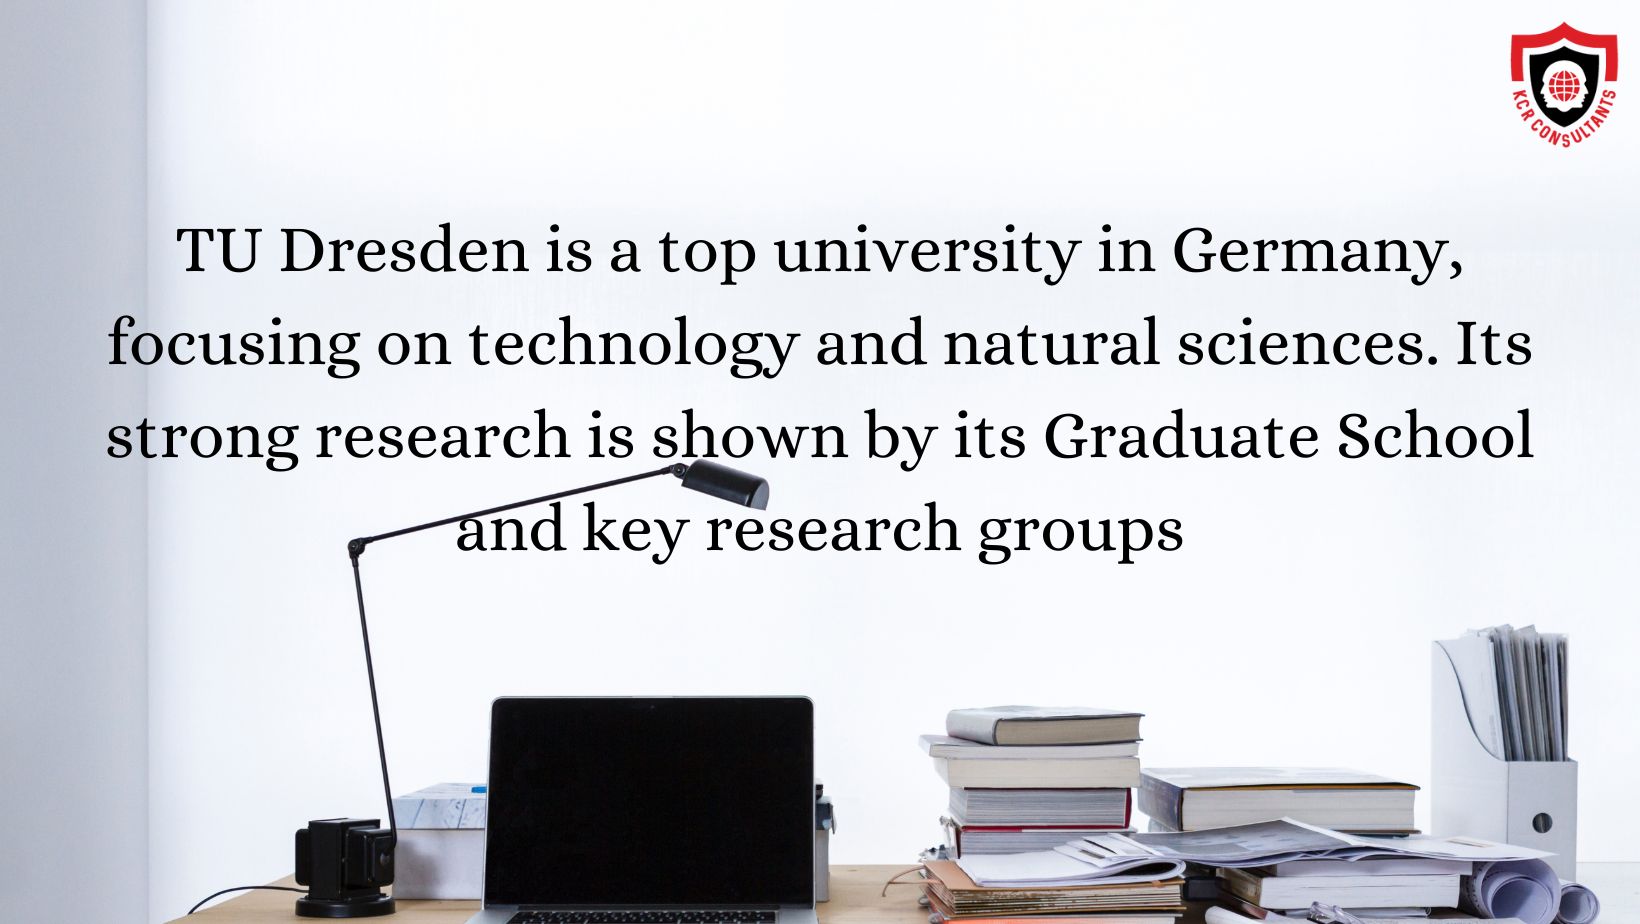 DRESDEN UNIVERSITY OF TECHNOLOGY - KCR CONSULTANTS - Research